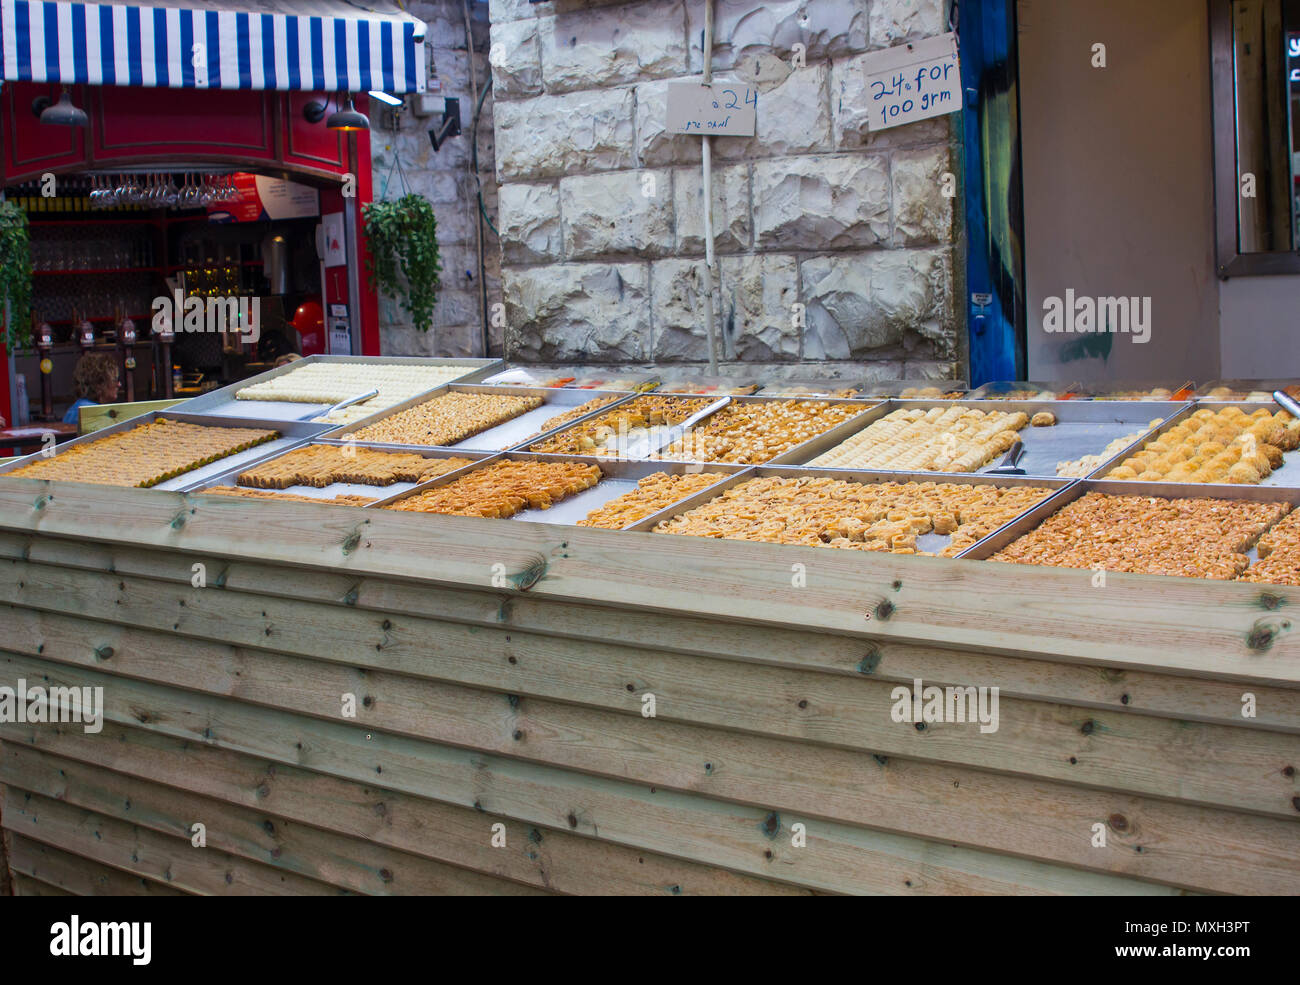 9 May 2018 A large and colourful selection of sweet bread and pastries   on sale at a stall at the Mahane Yehuda covered market in Jerusale4m Israel Stock Photo